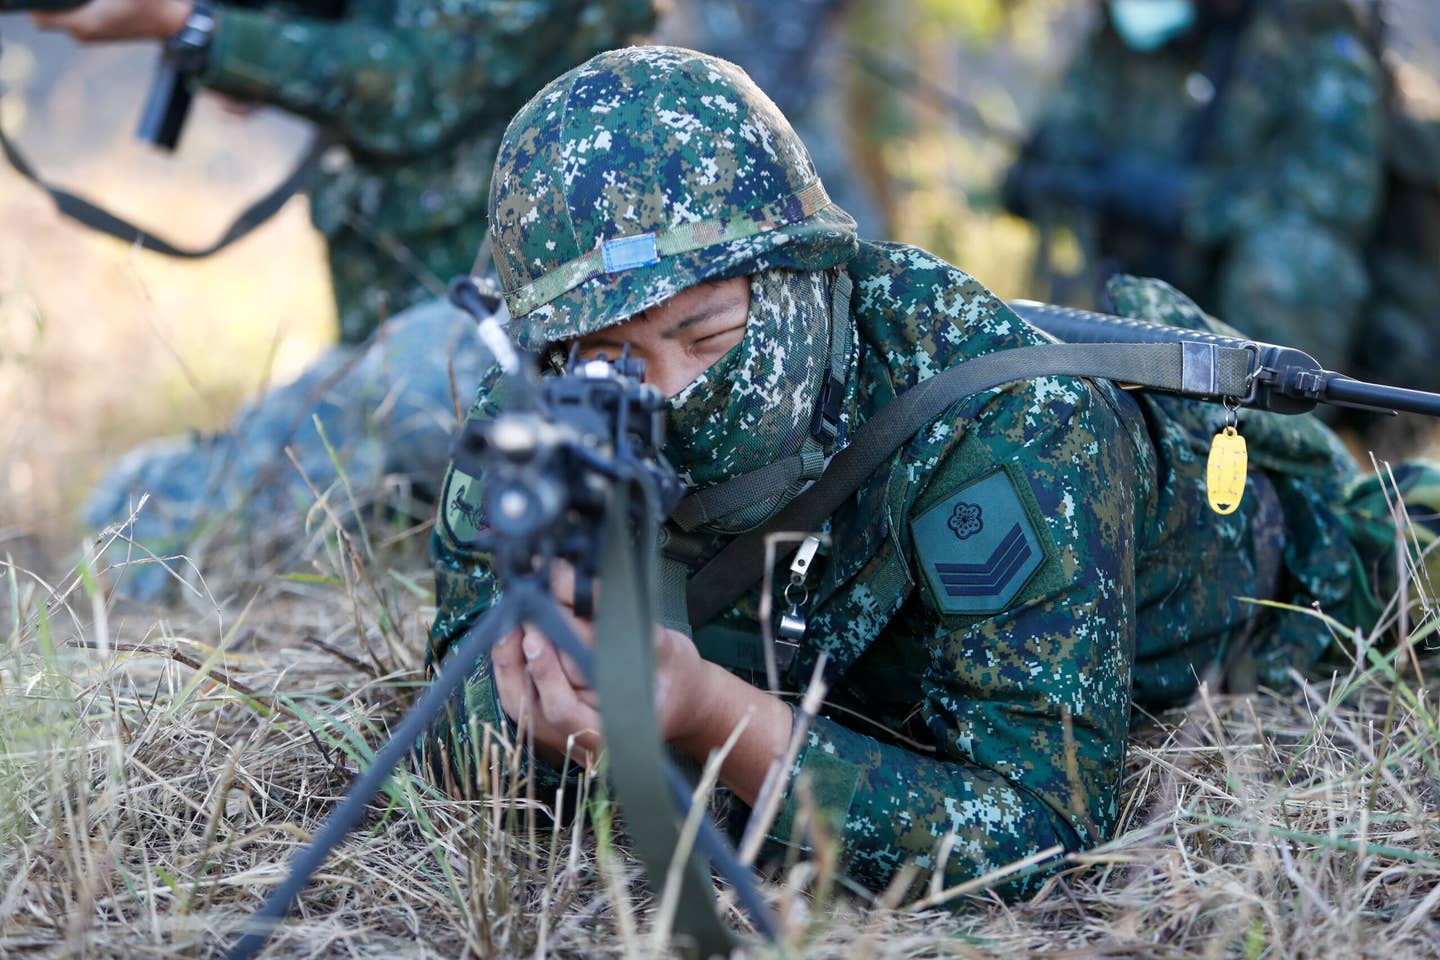 Soldiers holding machine guns and grenade launchers in position, during a shore defense operation as part of a military exercise simulating the defense against the intrusion of the Chinese military, amid rising tensions between Taipei and Beijing, in Tainan, Taiwan, 11 November 2021. <em>Photo by Ceng Shou Yi/NurPhoto via Getty Images</em>